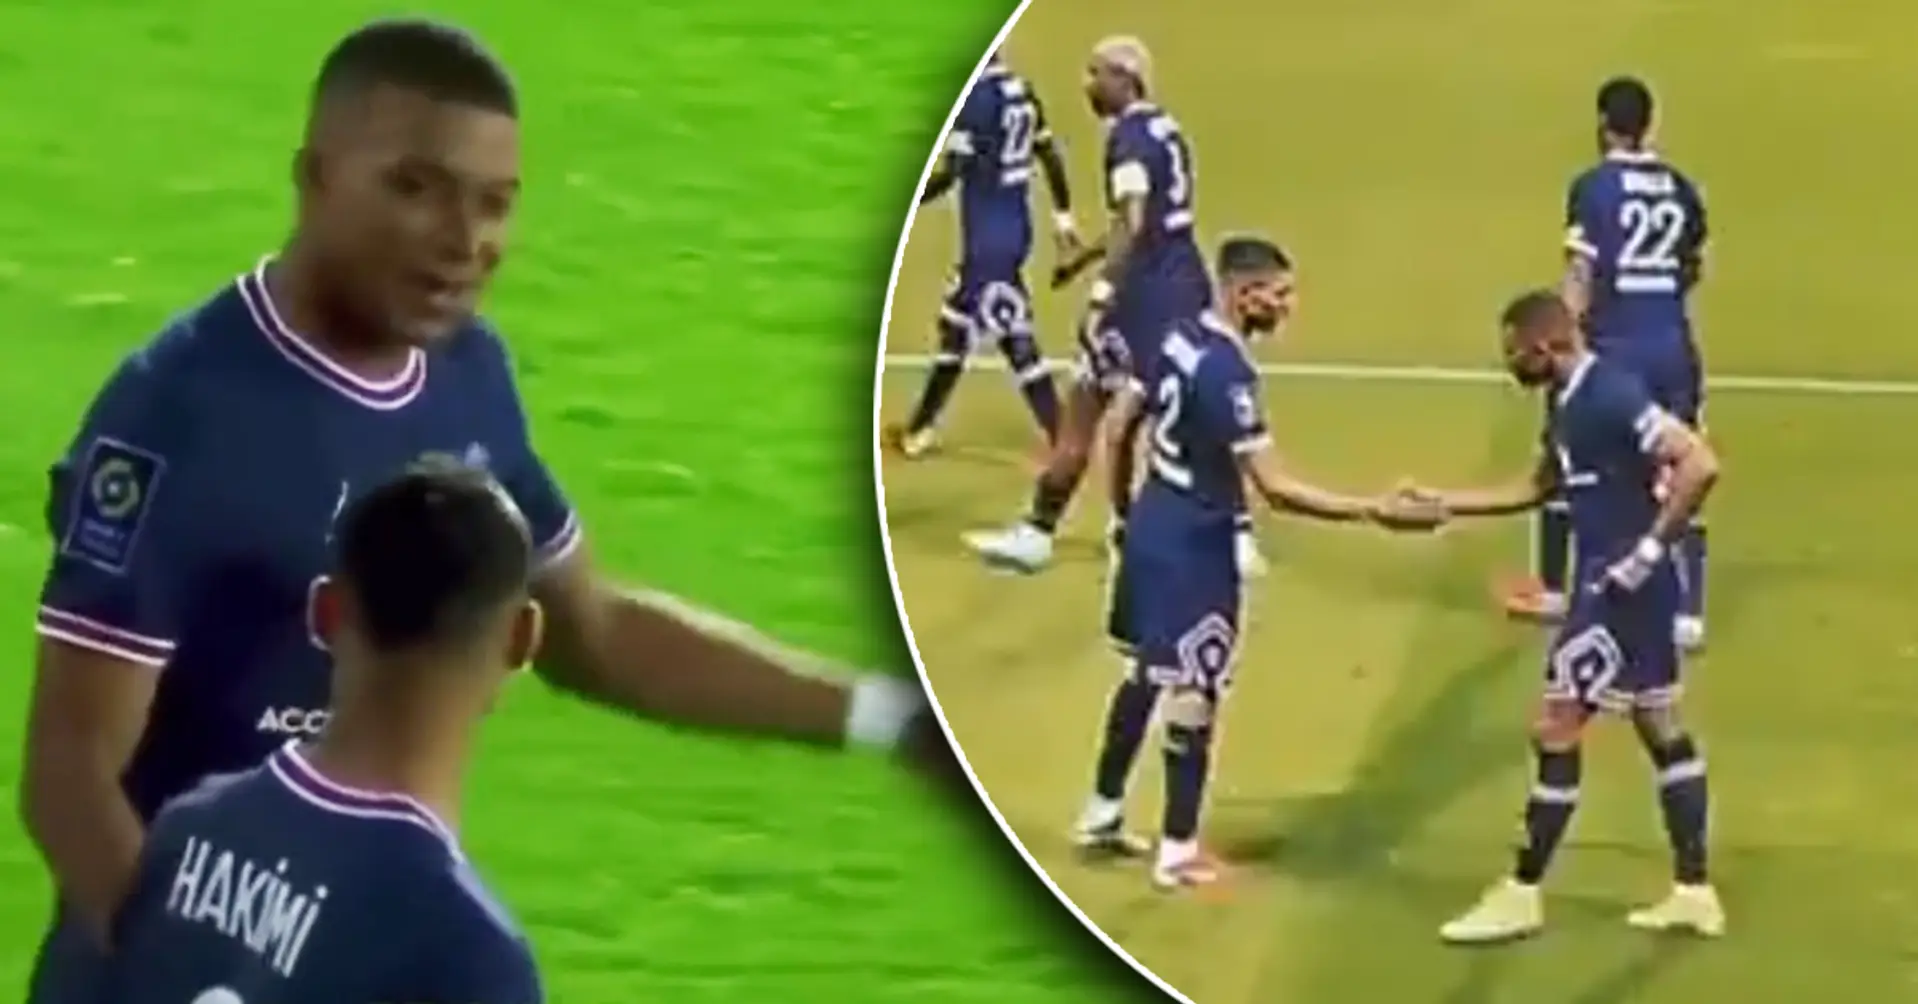 PSG fan notices two interesting episodes between Kylian Mbappe and Hakimi during match